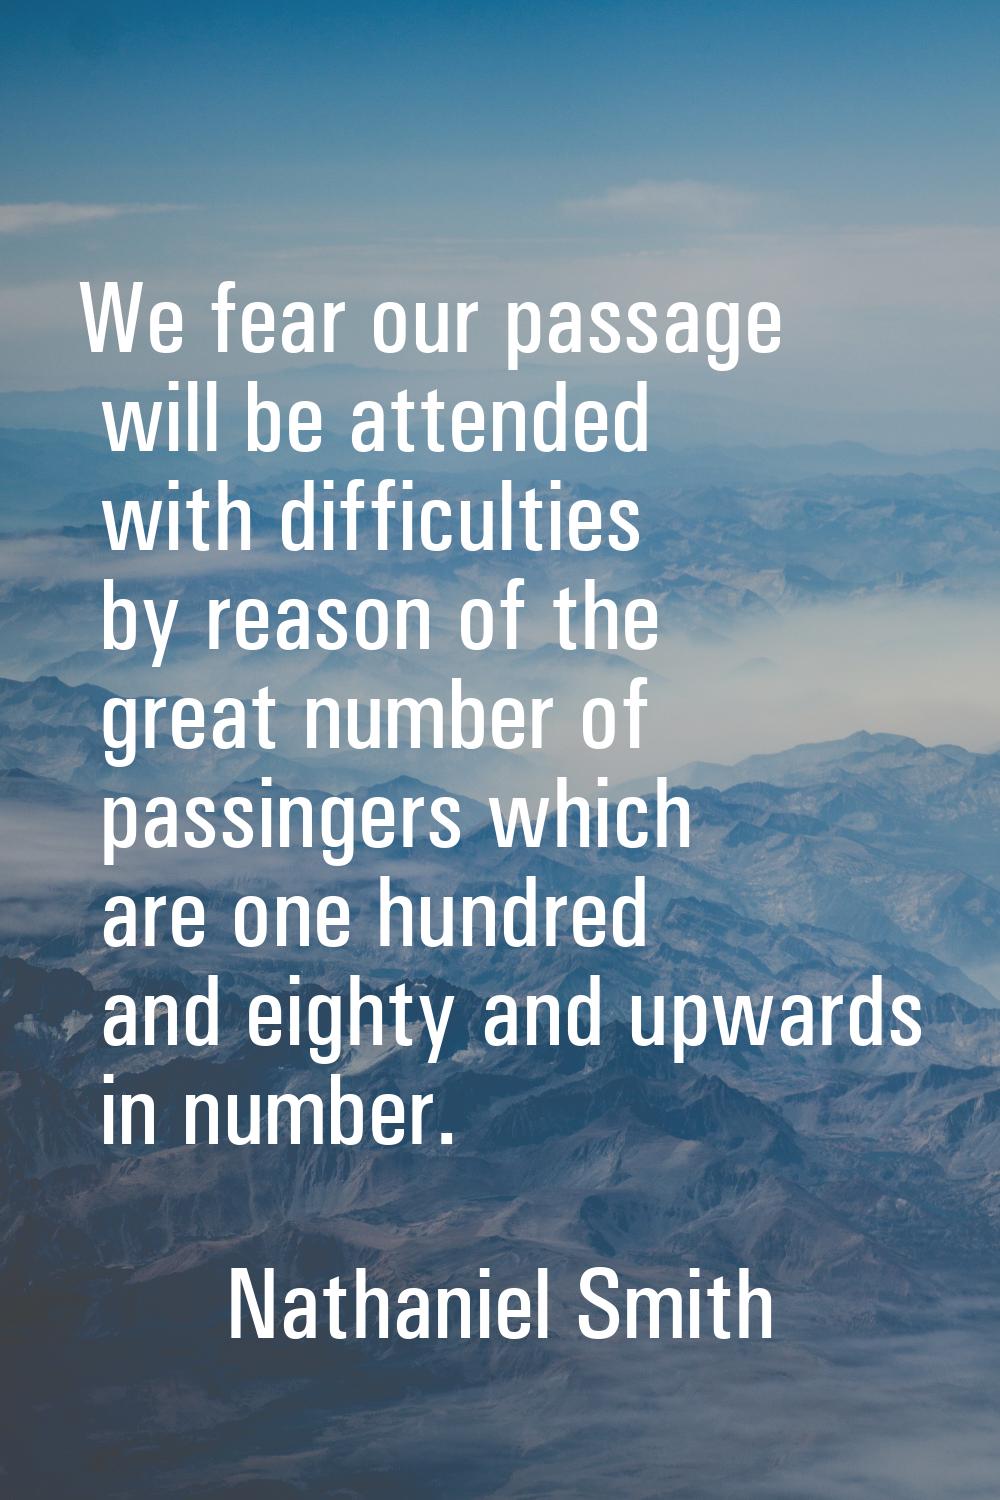 We fear our passage will be attended with difficulties by reason of the great number of passingers 